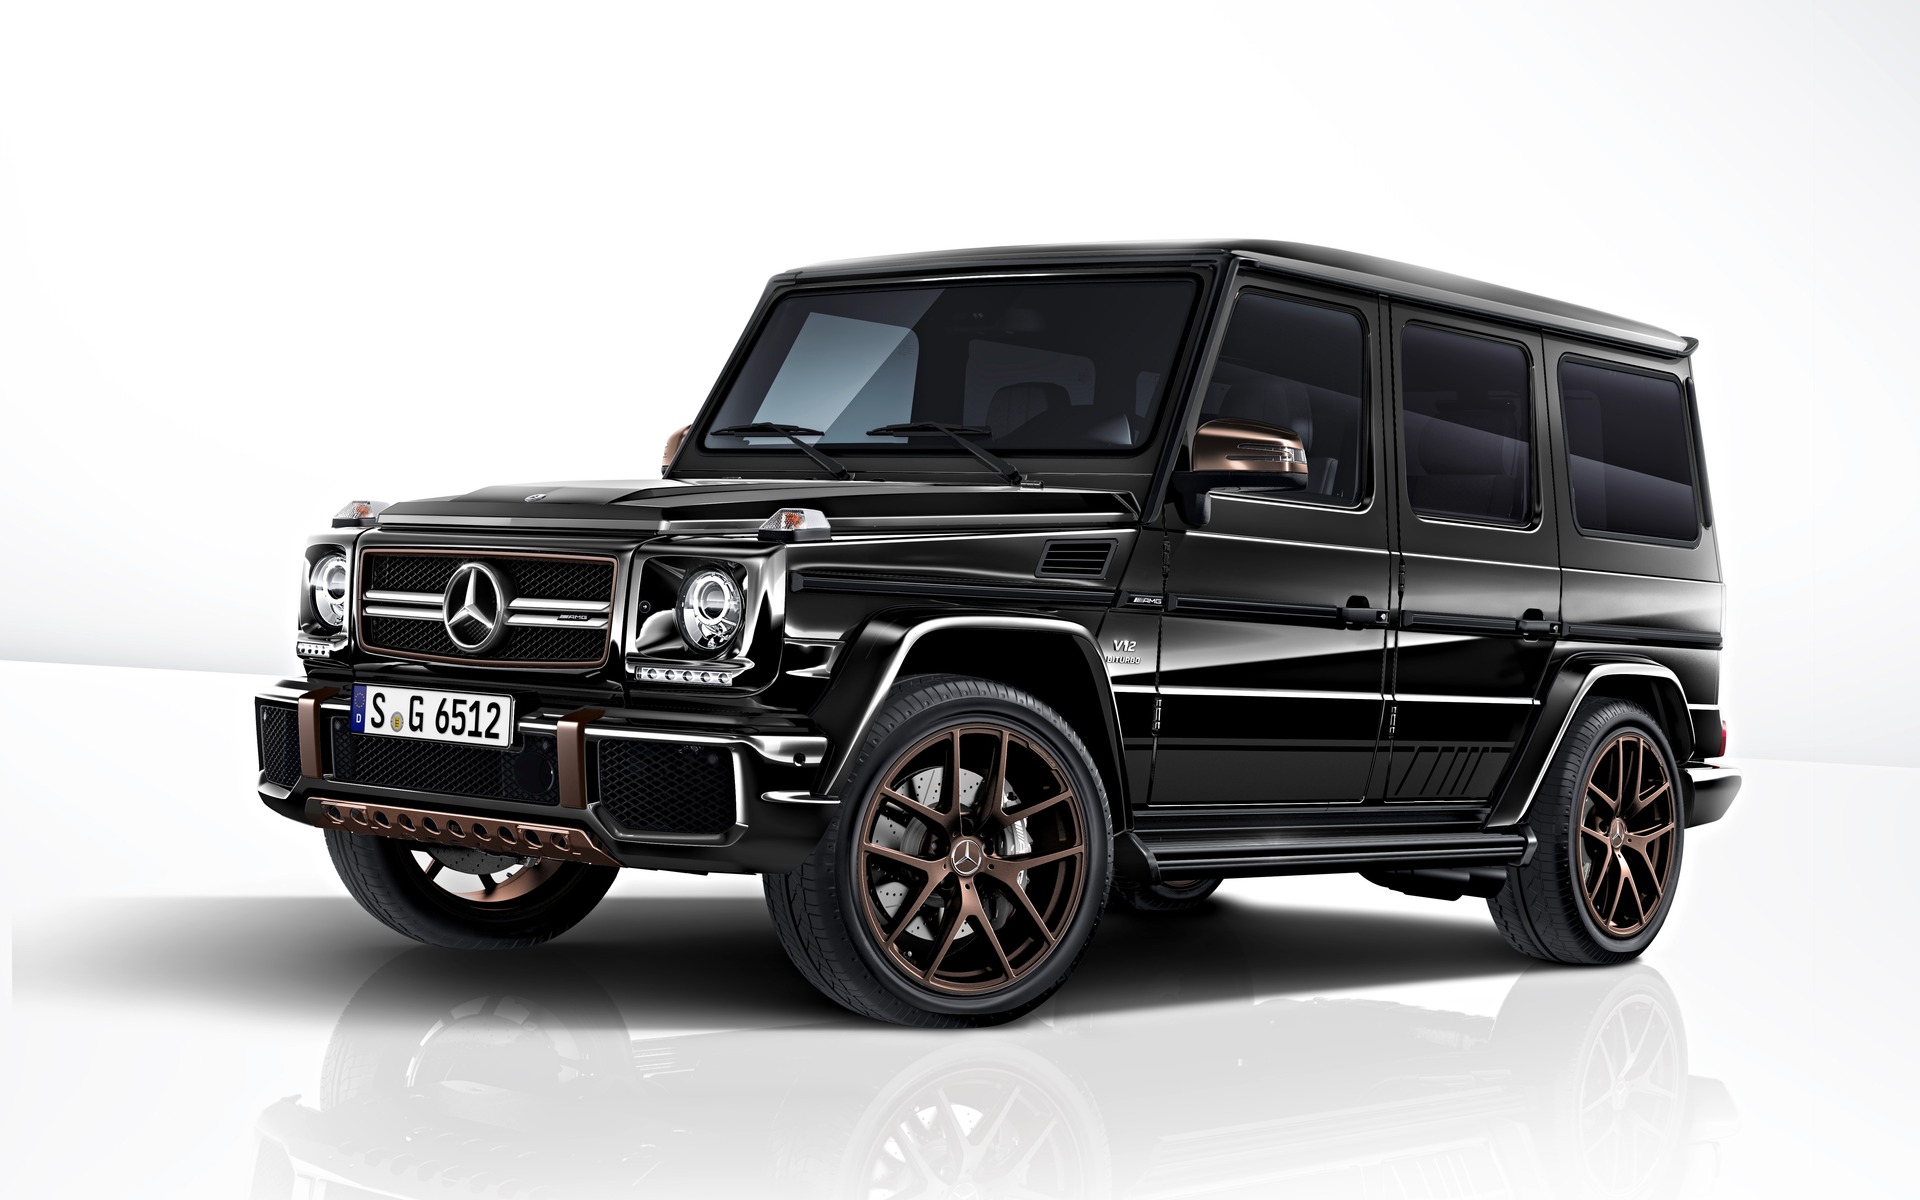 18 Mercedes Benz G Class News Reviews Picture Galleries And Videos The Car Guide